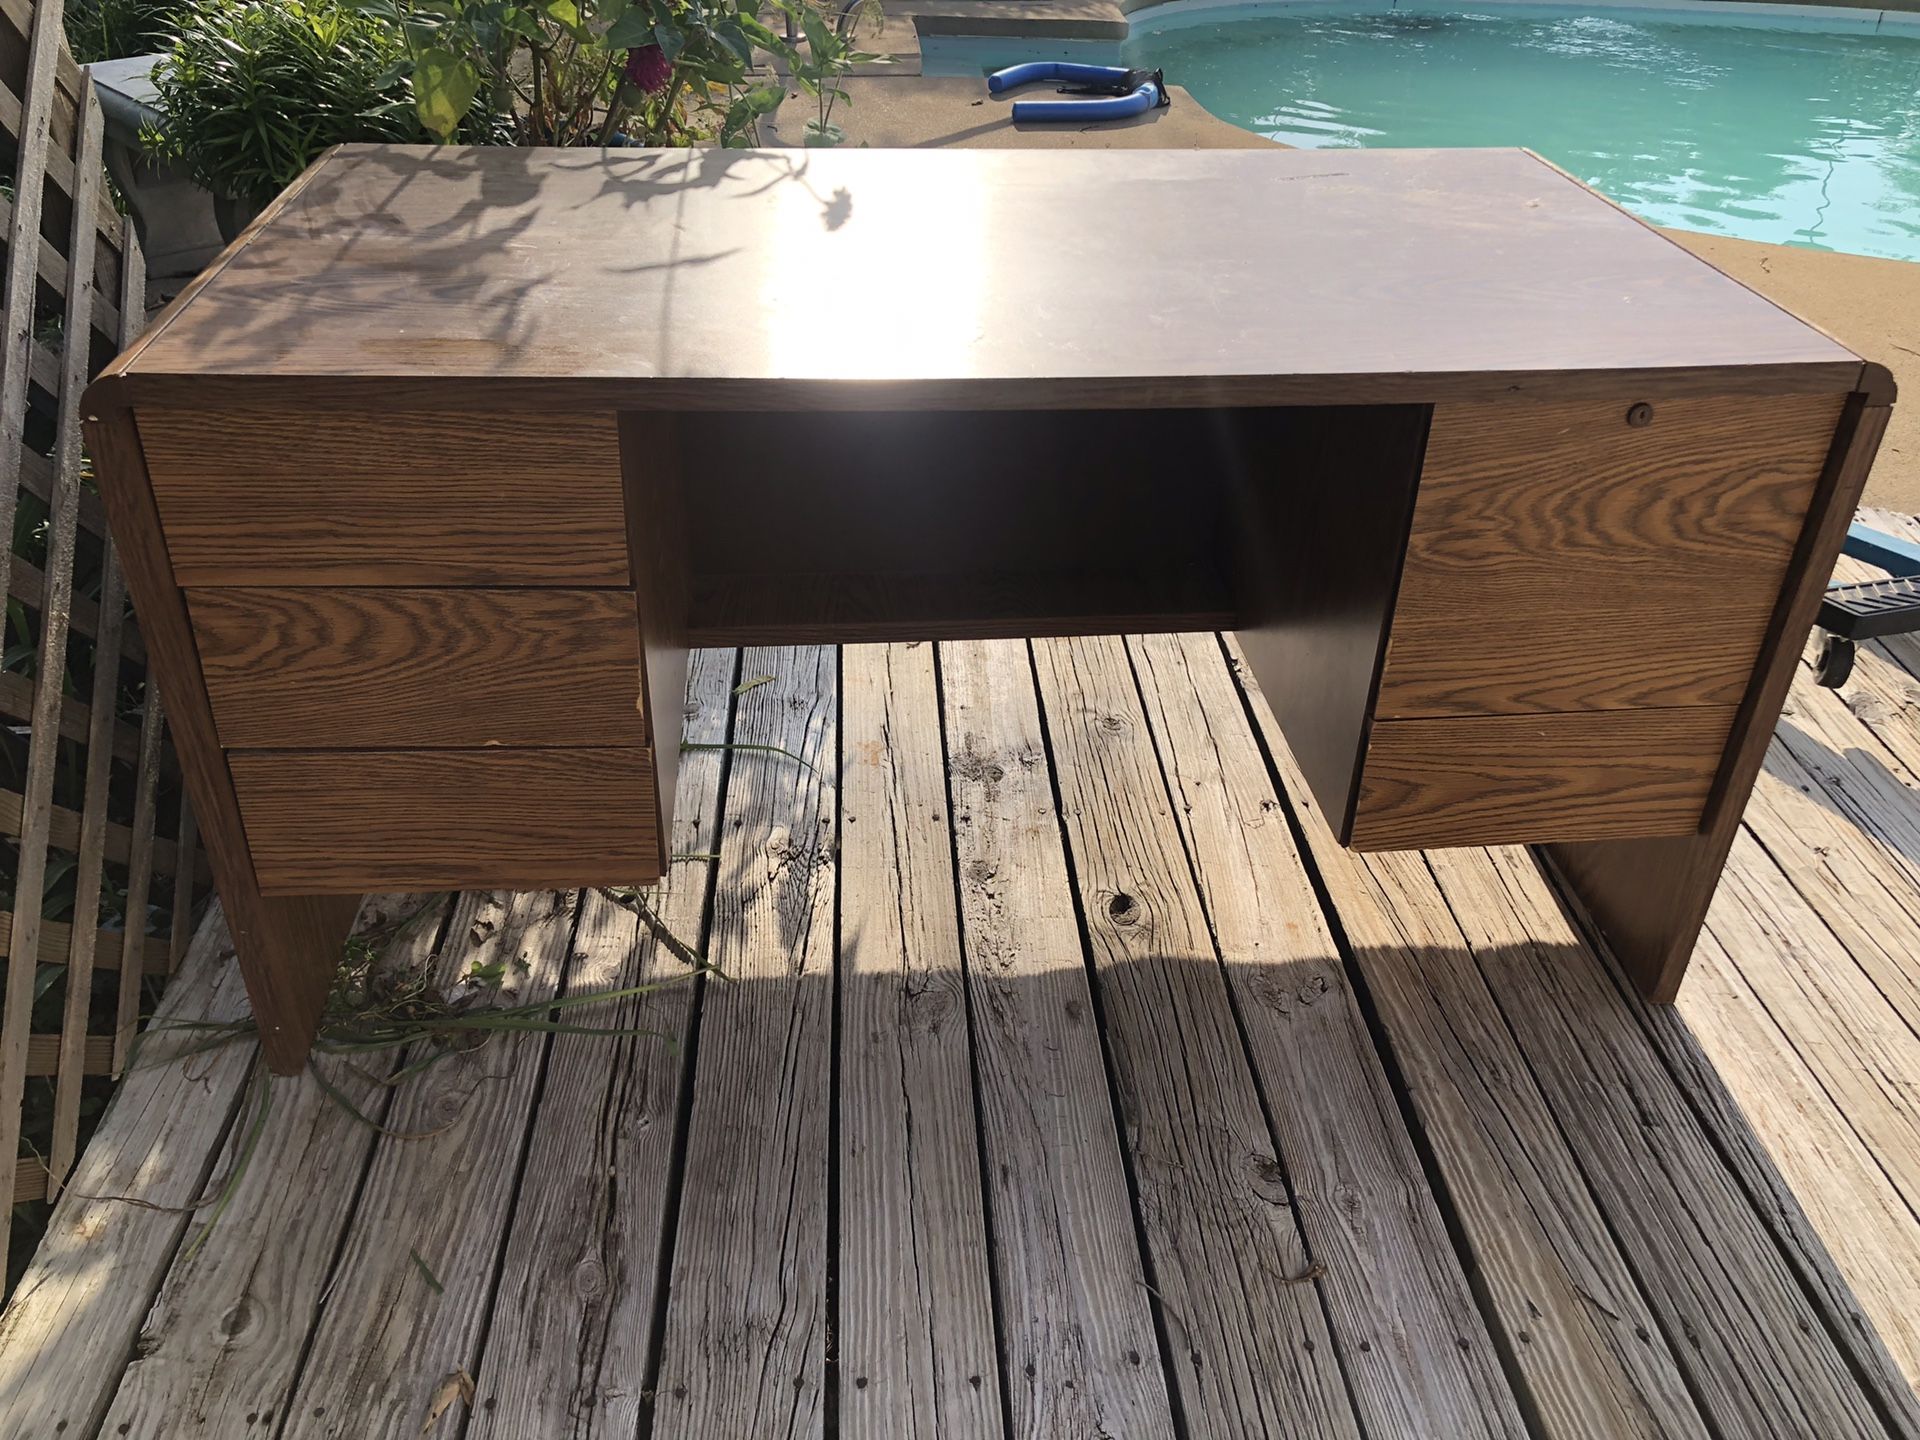 Heavy duty desk with built in filing drawer